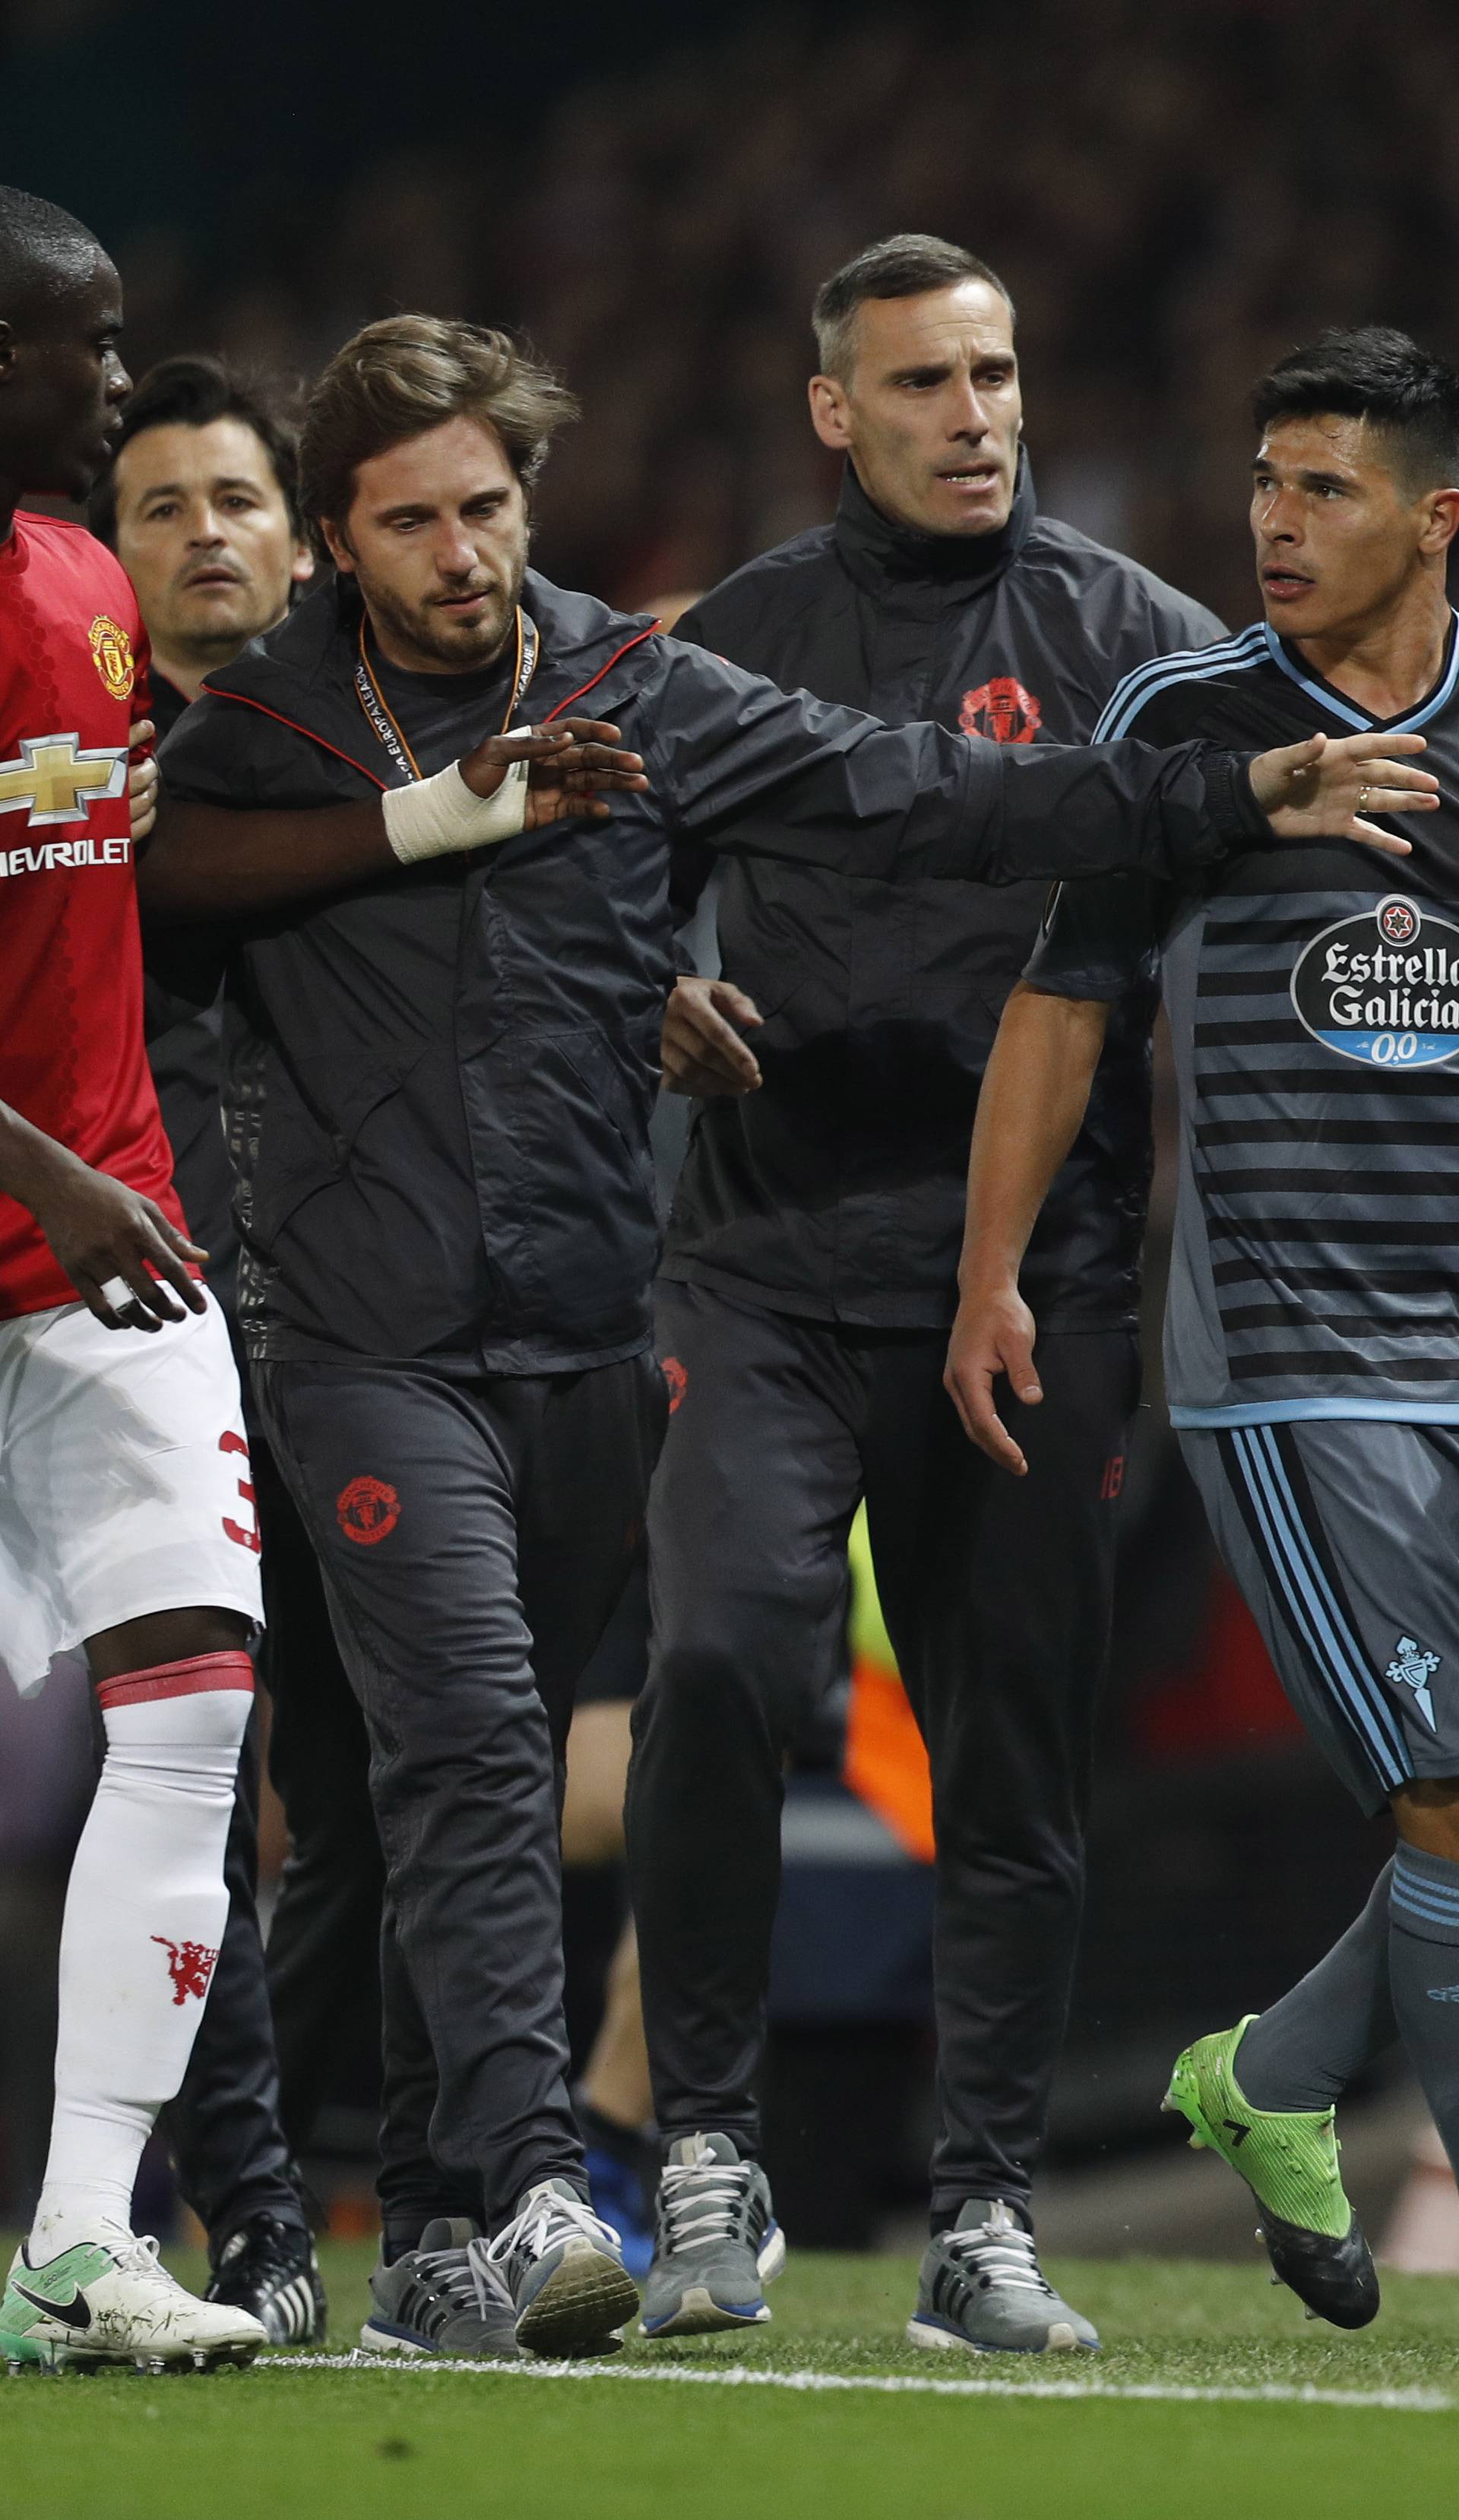 Manchester United's Eric Bailly clashes with Celta Vigo's Facundo Roncaglia after both are sent off